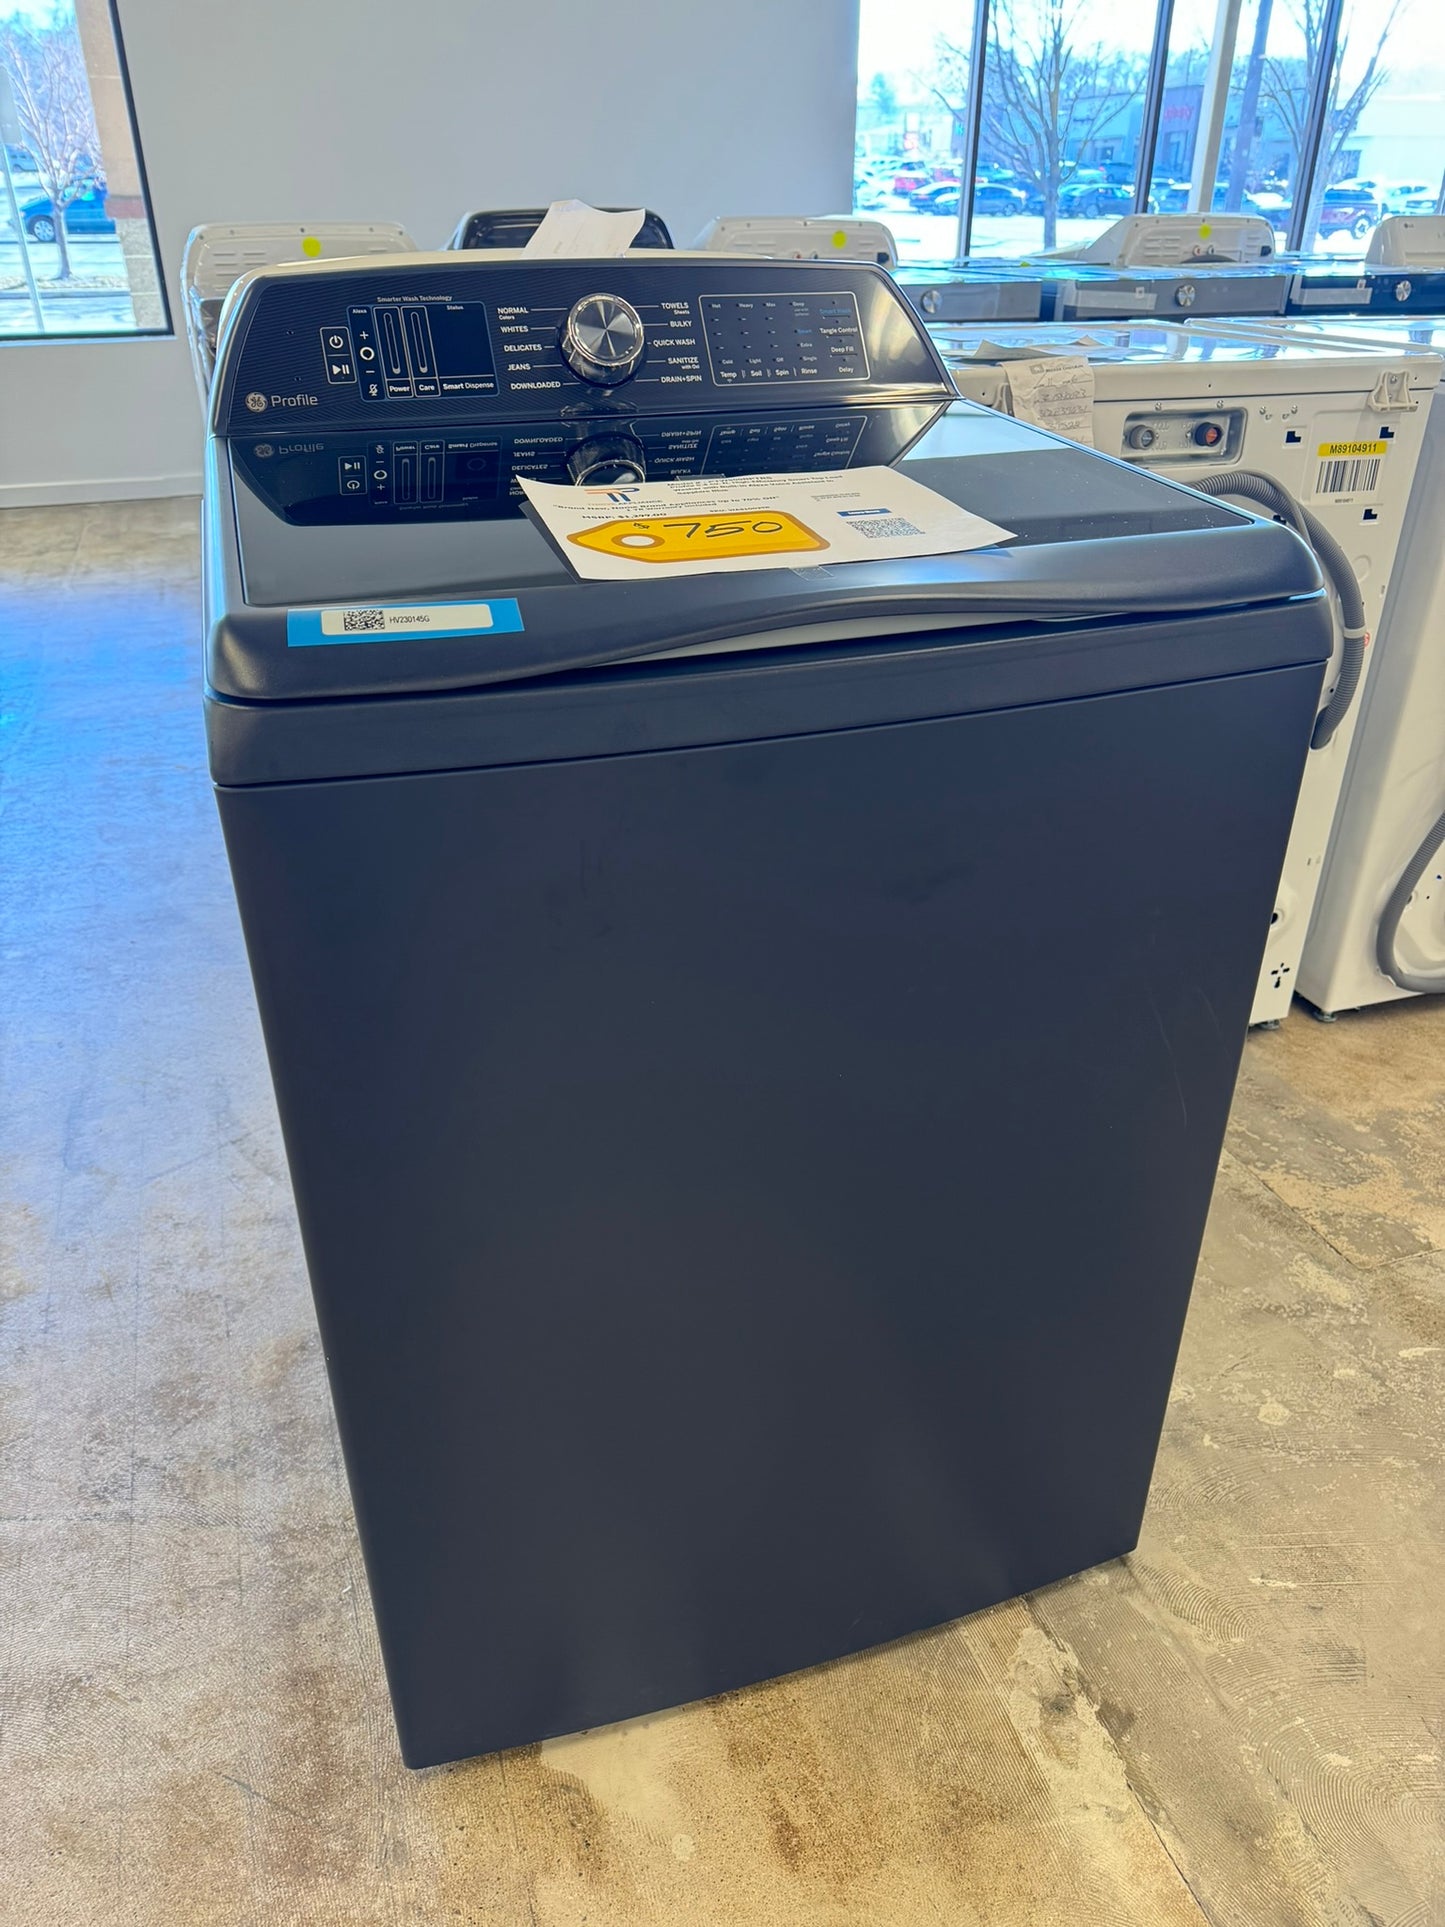 SAPPHIRE BLUE GE PROFILE TOP LOAD WASHER MODEL: PTW900BPTRS  WAS10029R